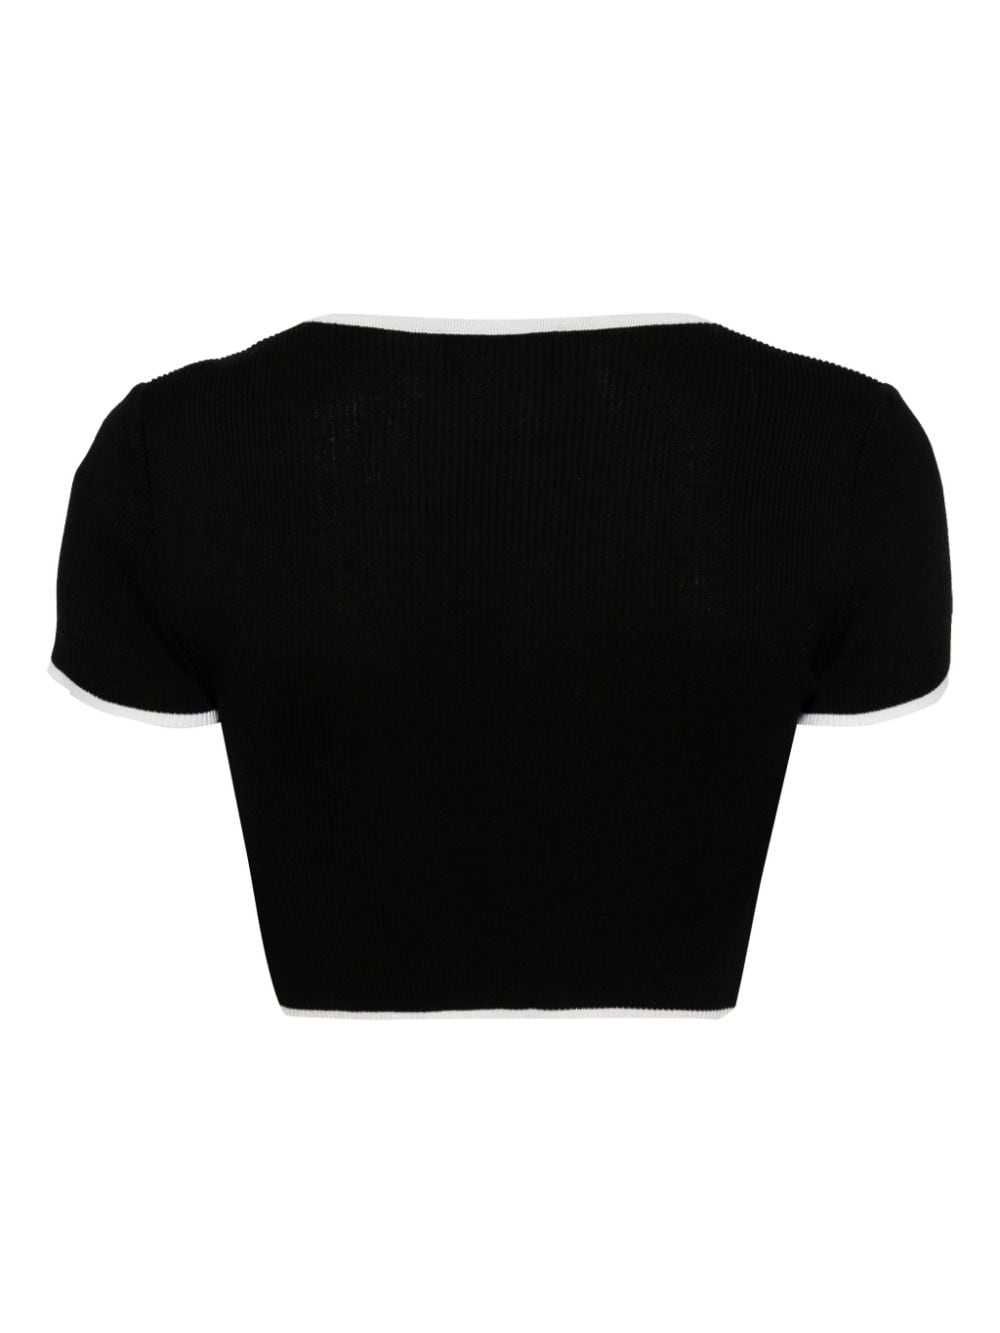 CHANEL Pre-Owned 1995 CC cropped T-shirt - Black - image 2